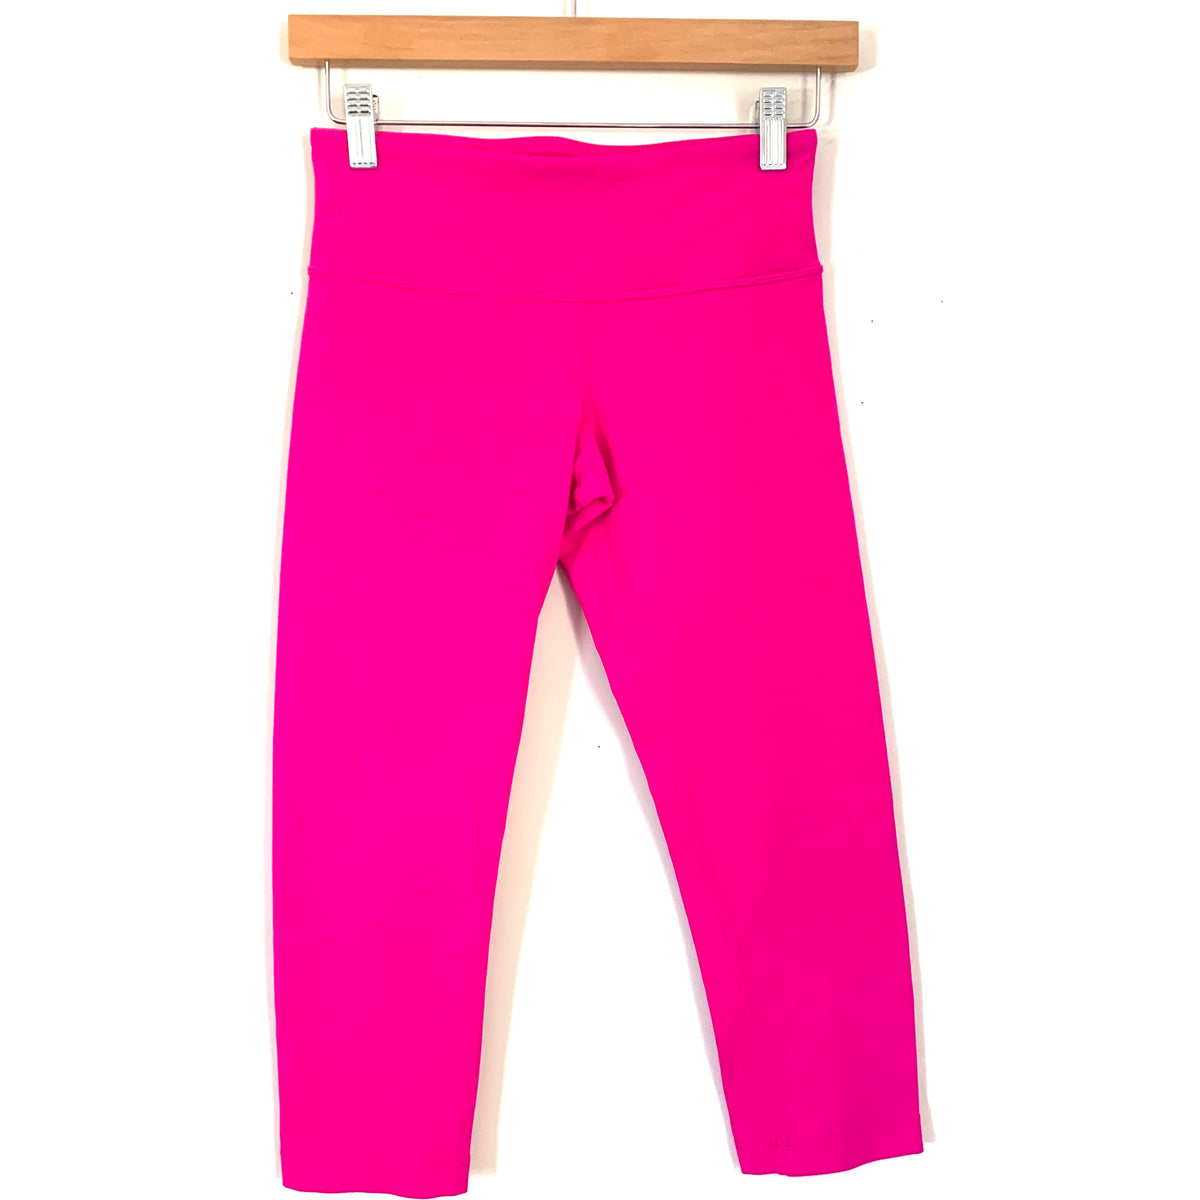 Lululemon Bright Pink Crop Legging- Size 4 (Inseam 19) – The Saved  Collection